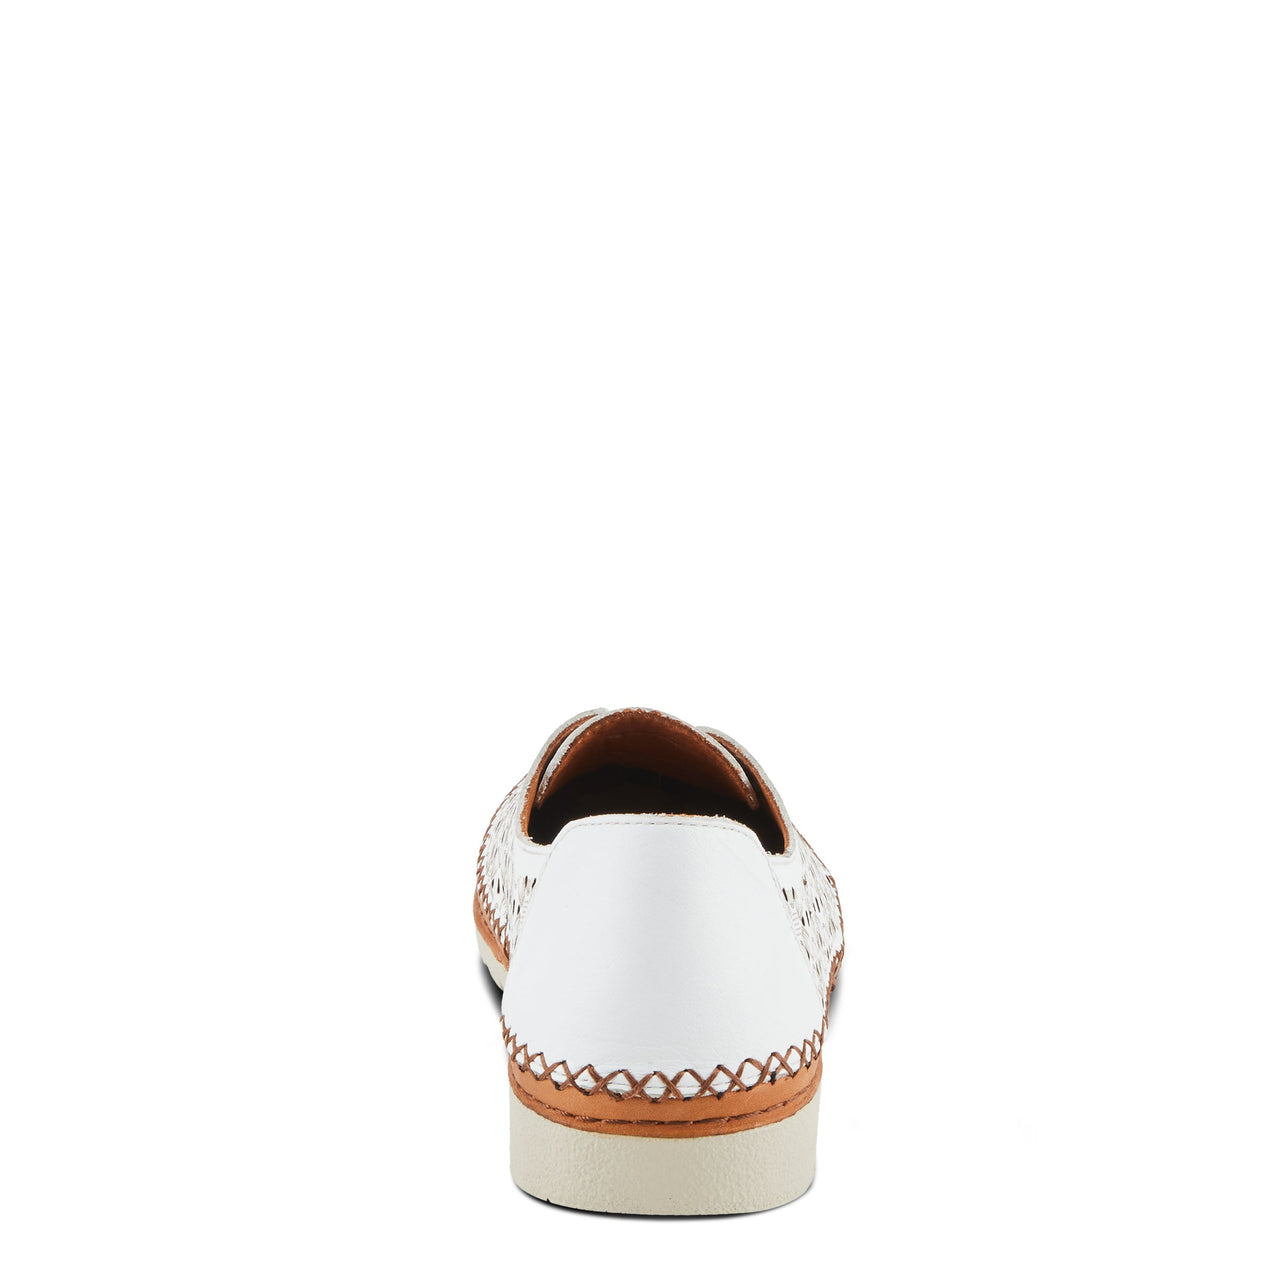 Stylish and comfortable Spring Step Indi Shoes in brown leather with lace-up design and cushioned insoles for all-day wear